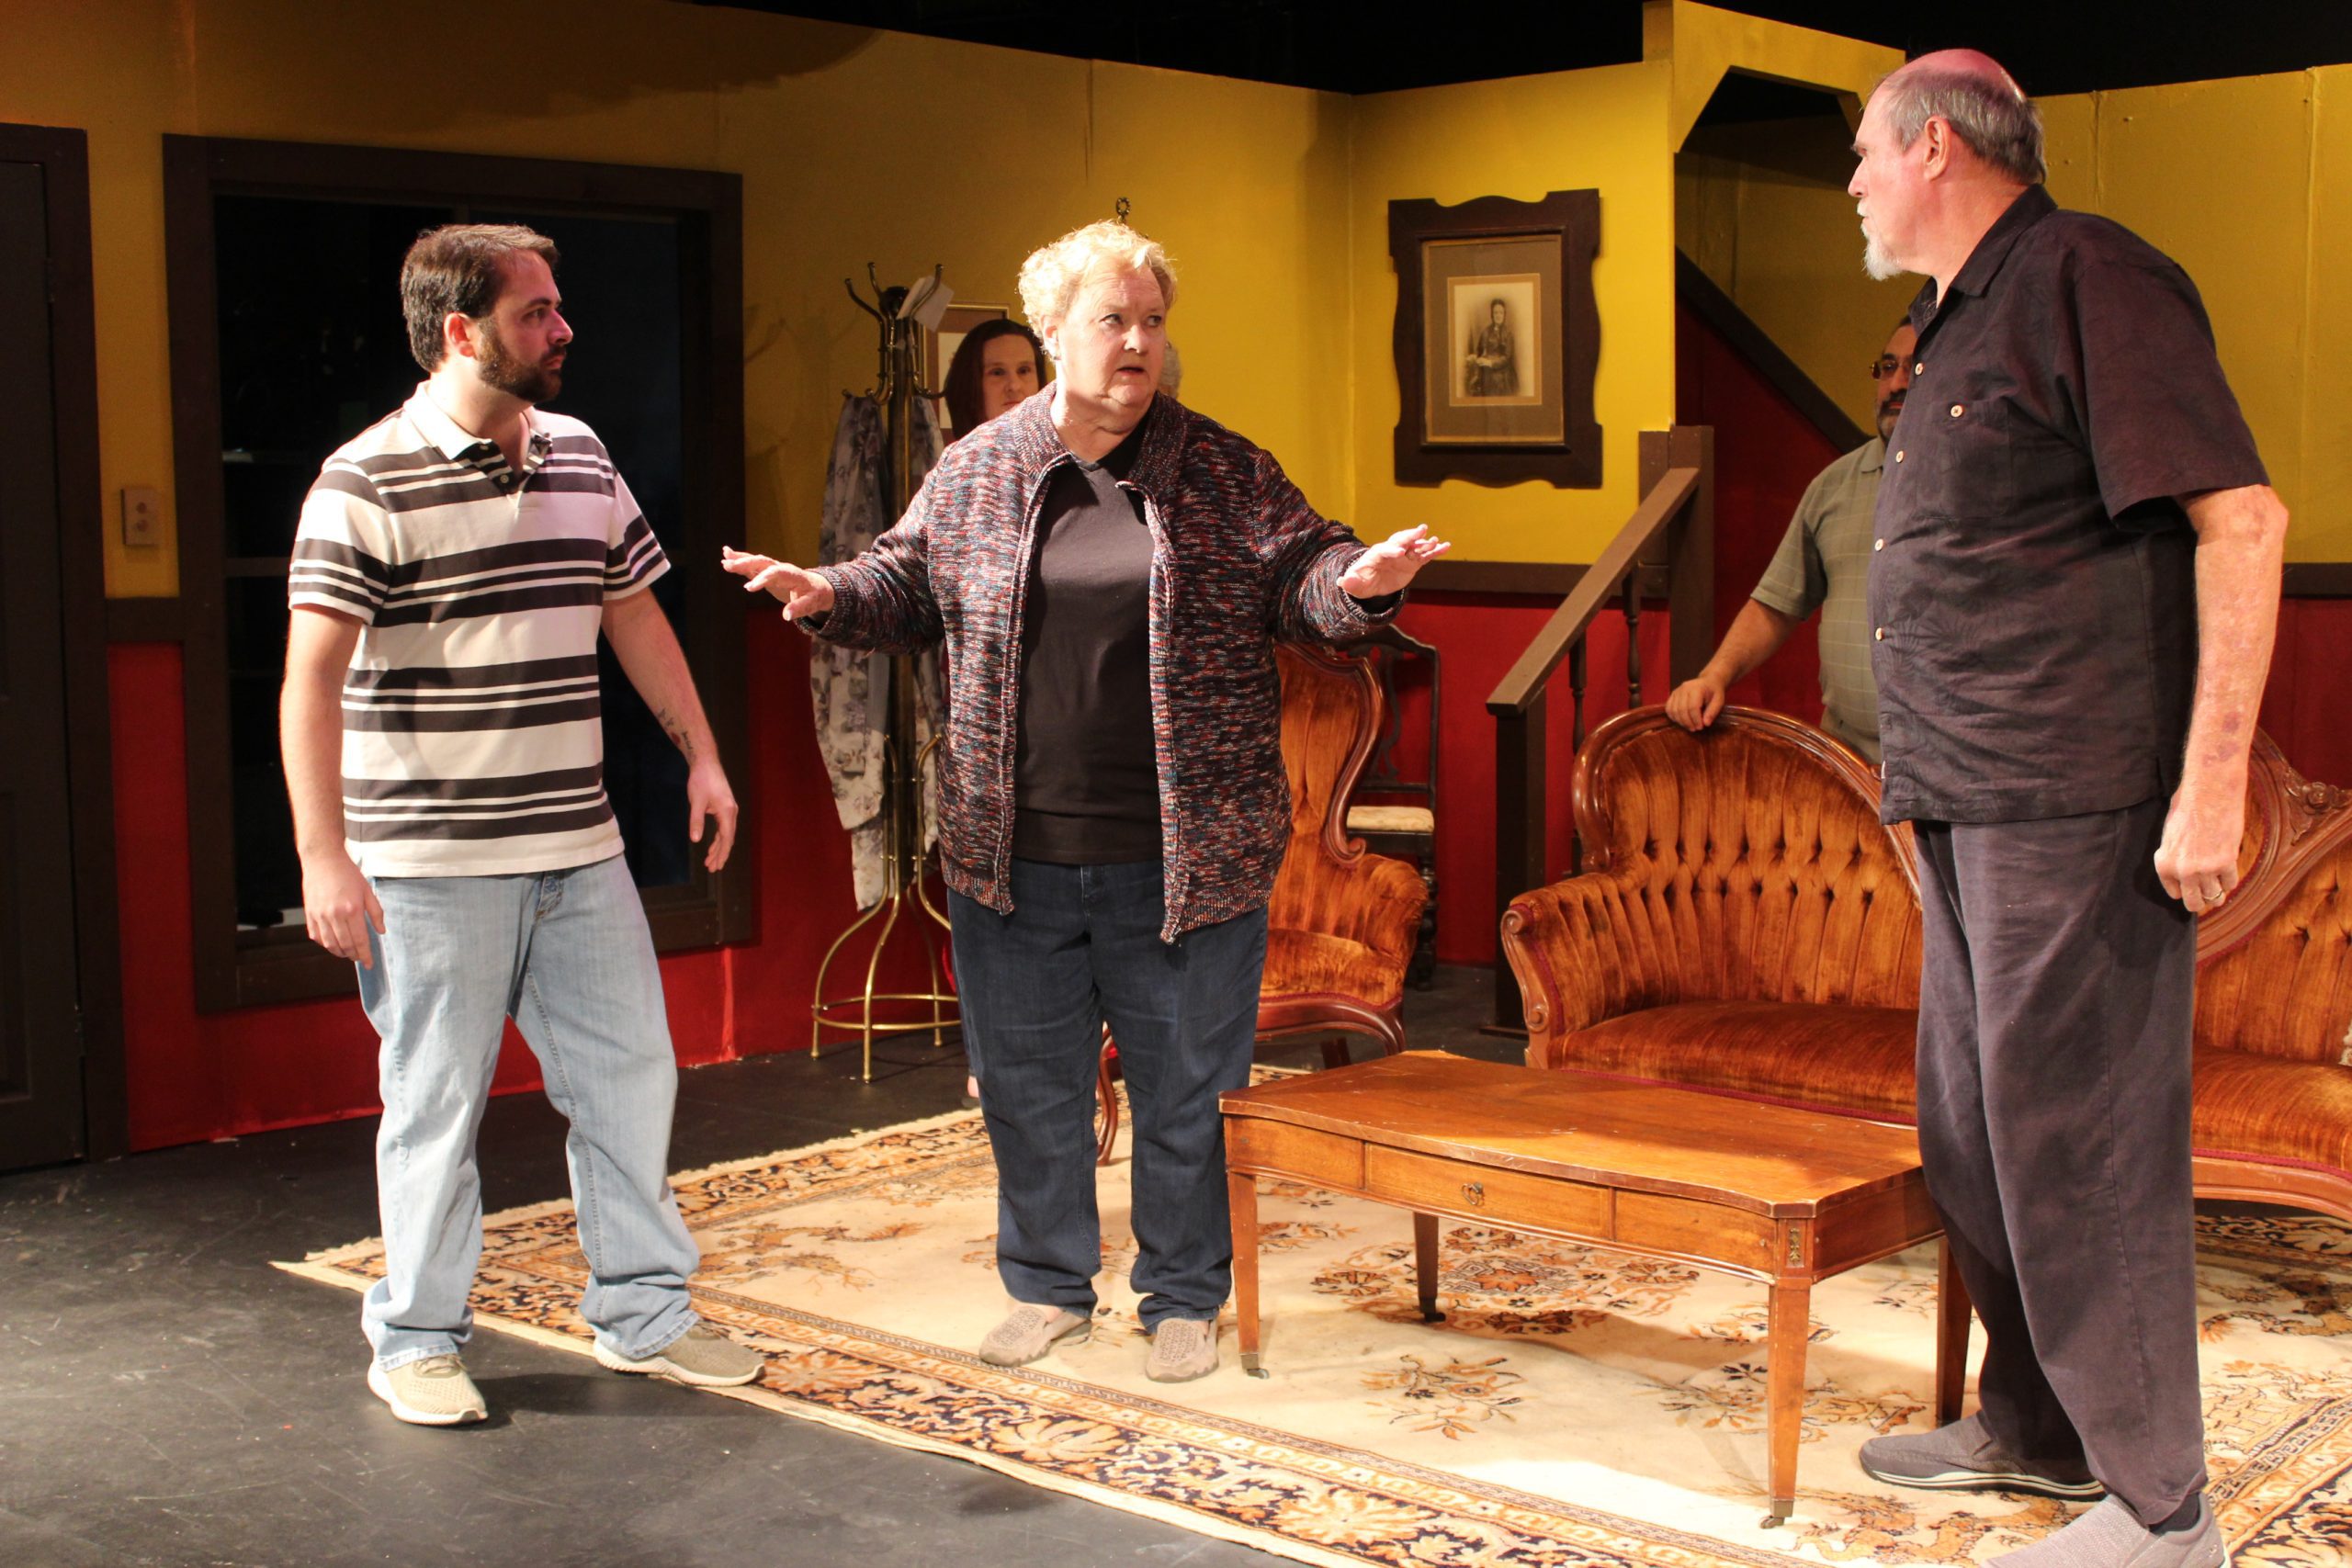 Leeds Arts Council puts their spin on 'Arsenic and Old Lace'